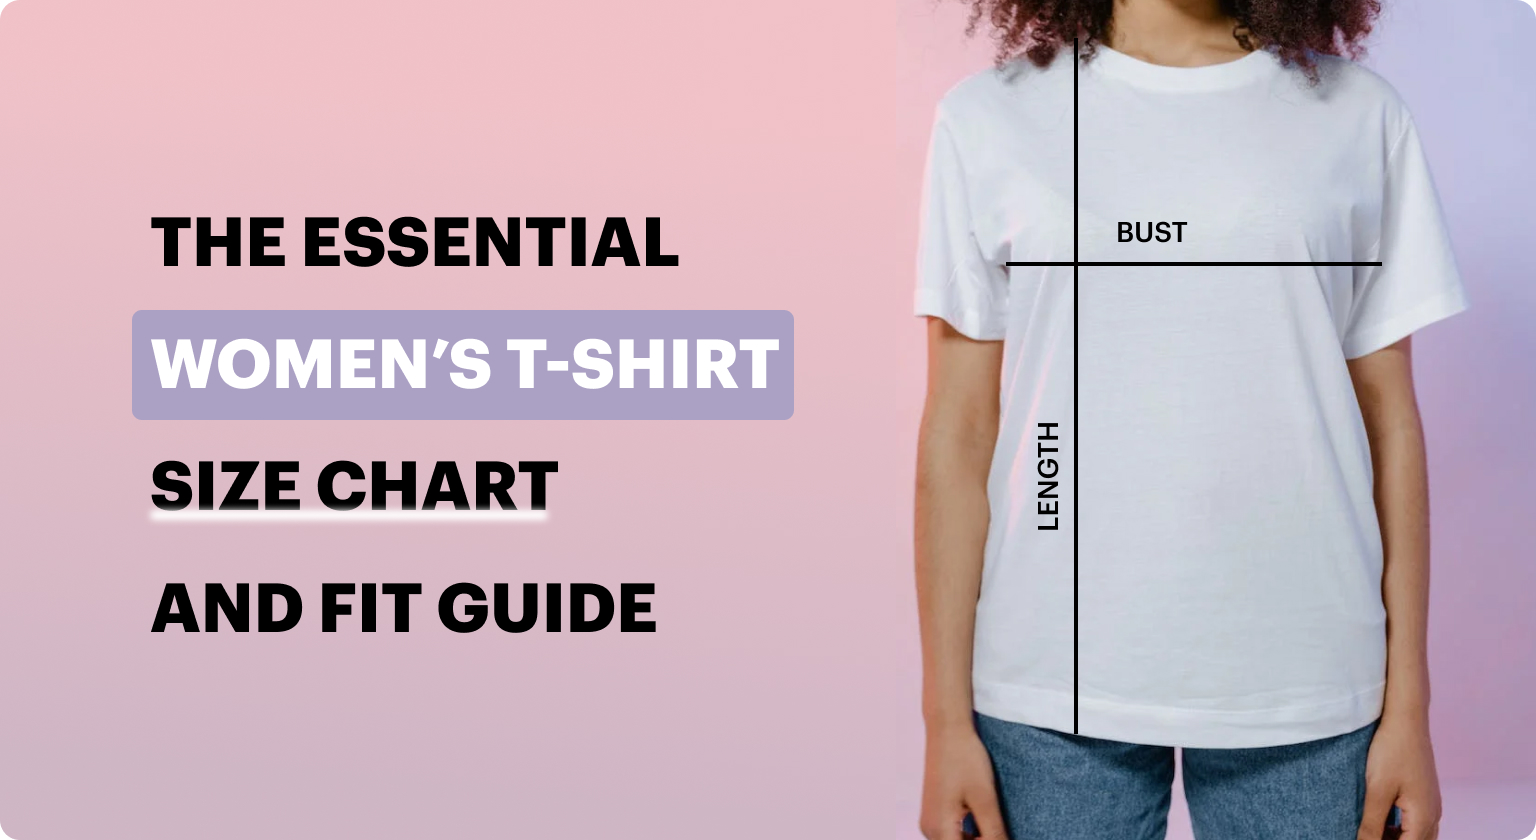 Sizing Chart & Fit Guide - Women's